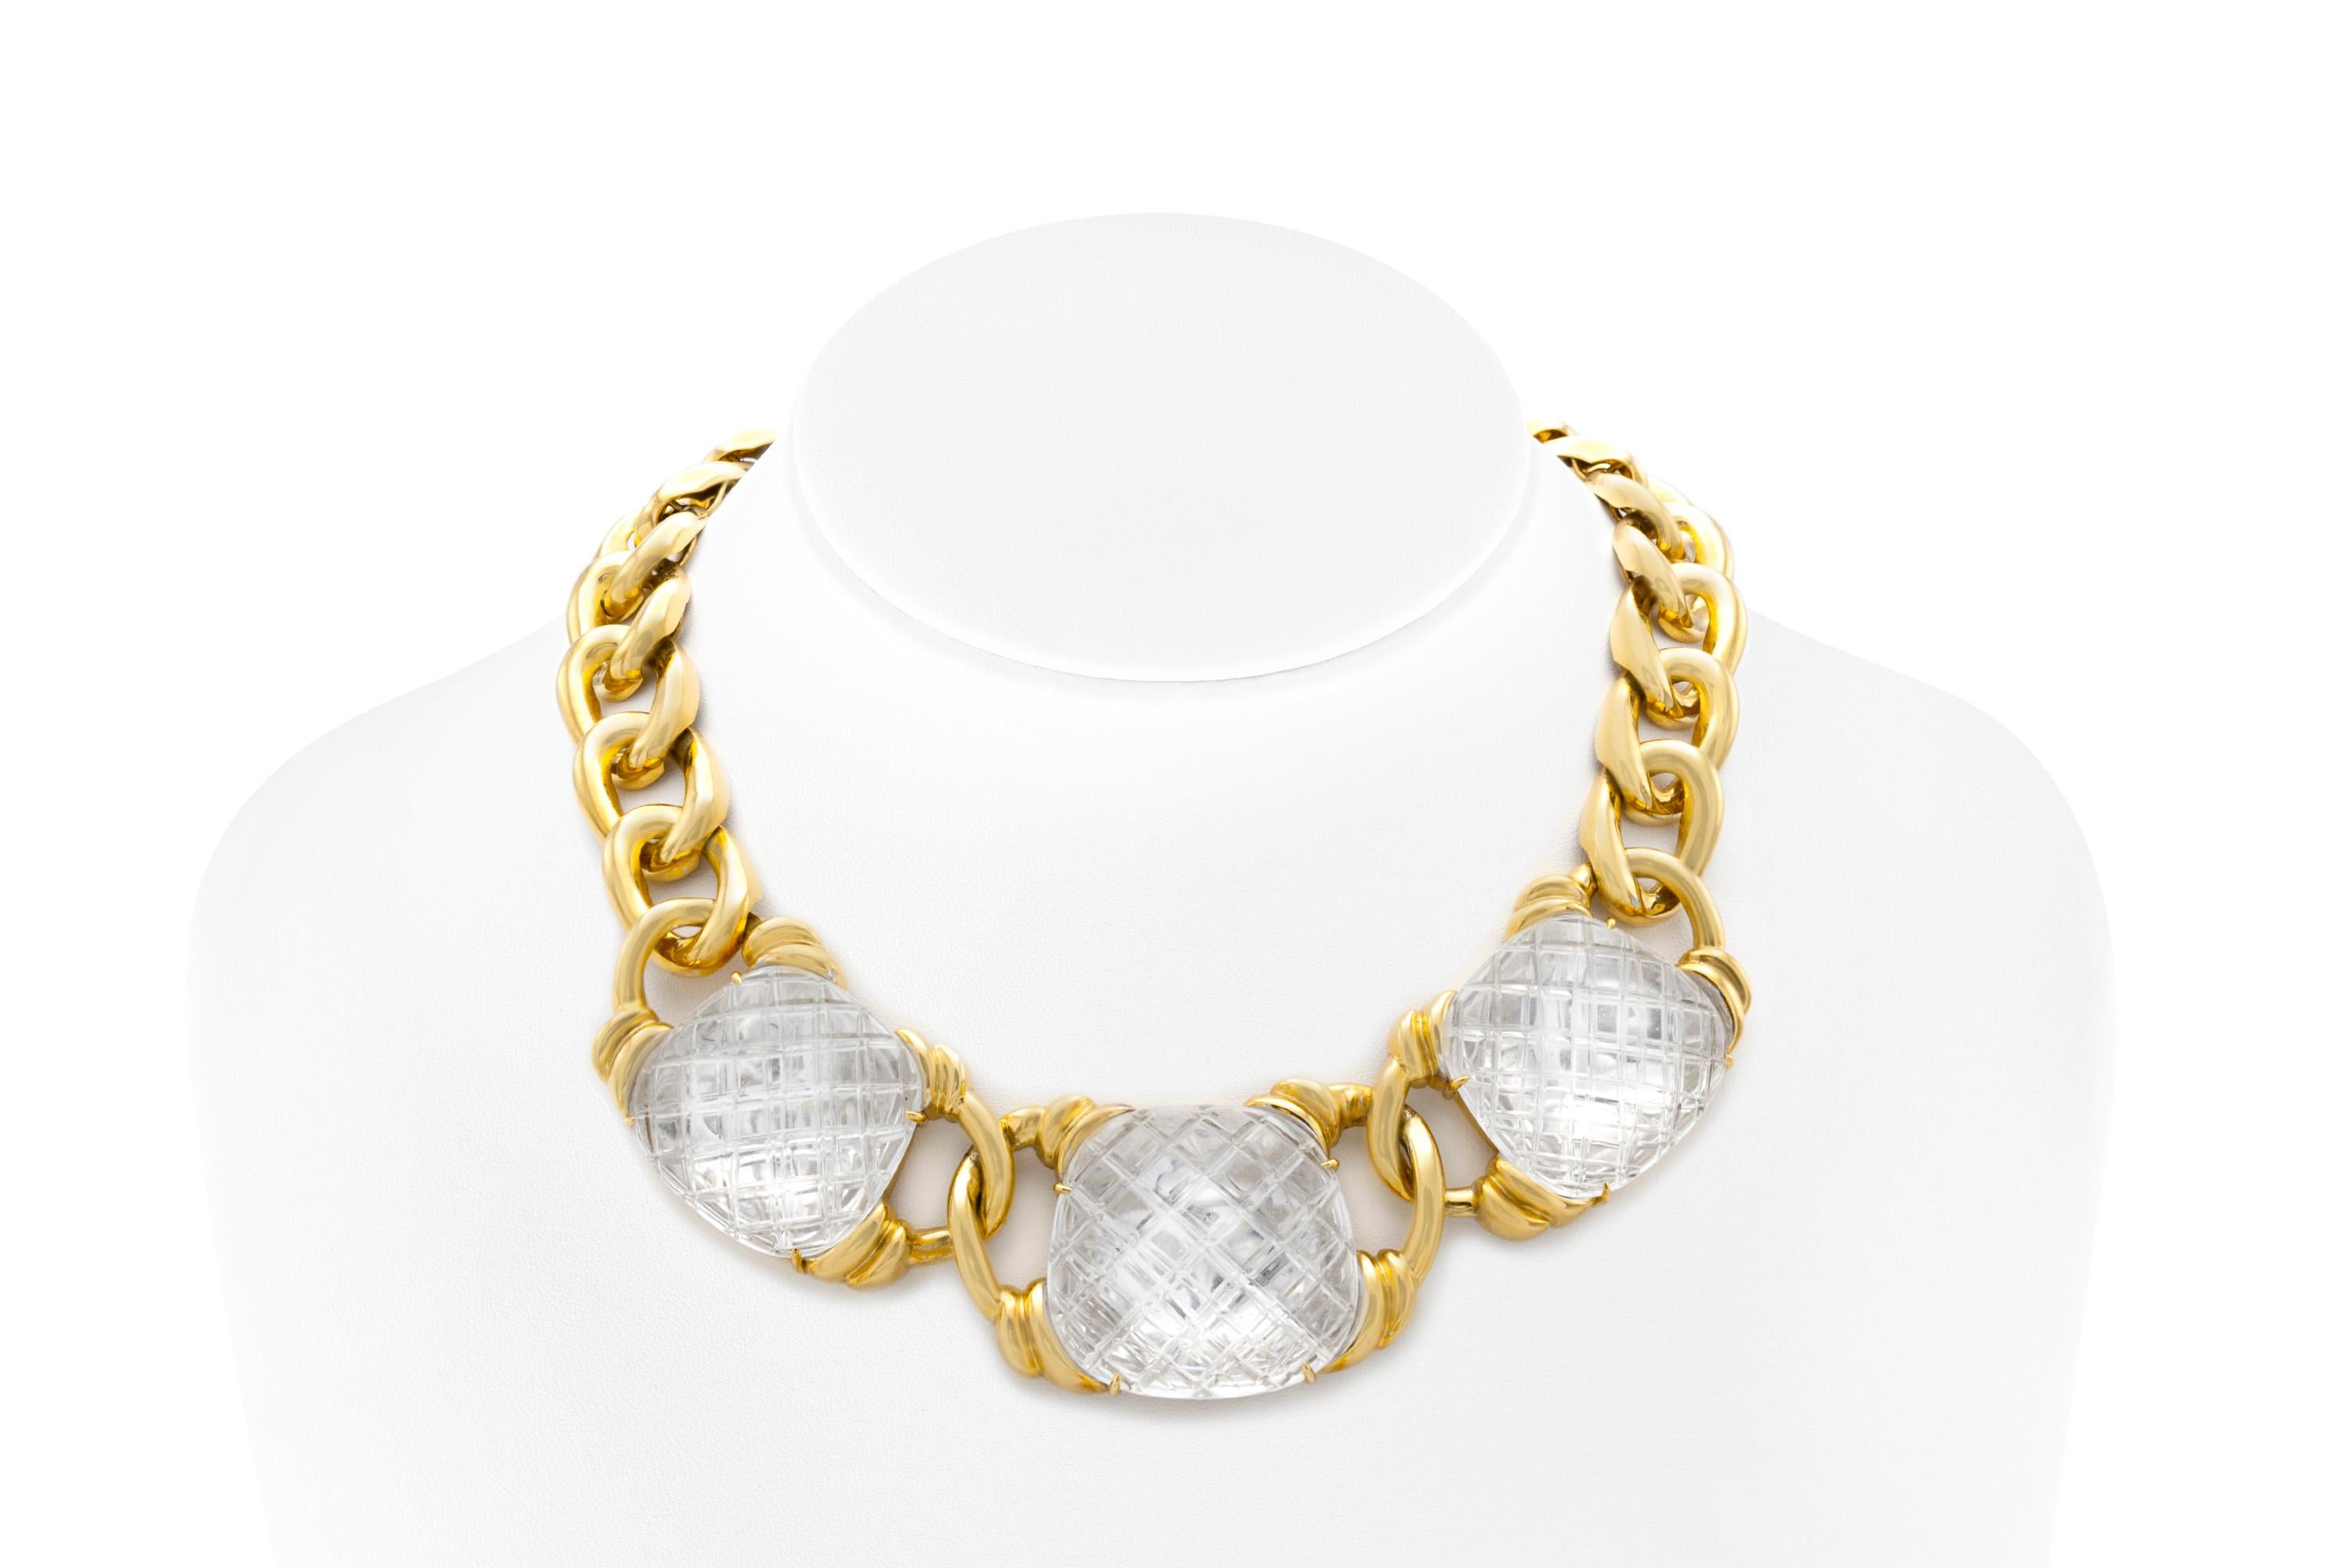 Finely crafted in 18k yellow gold with three cross-hatched rock crystals.
Signed by David Webb.
16 inches